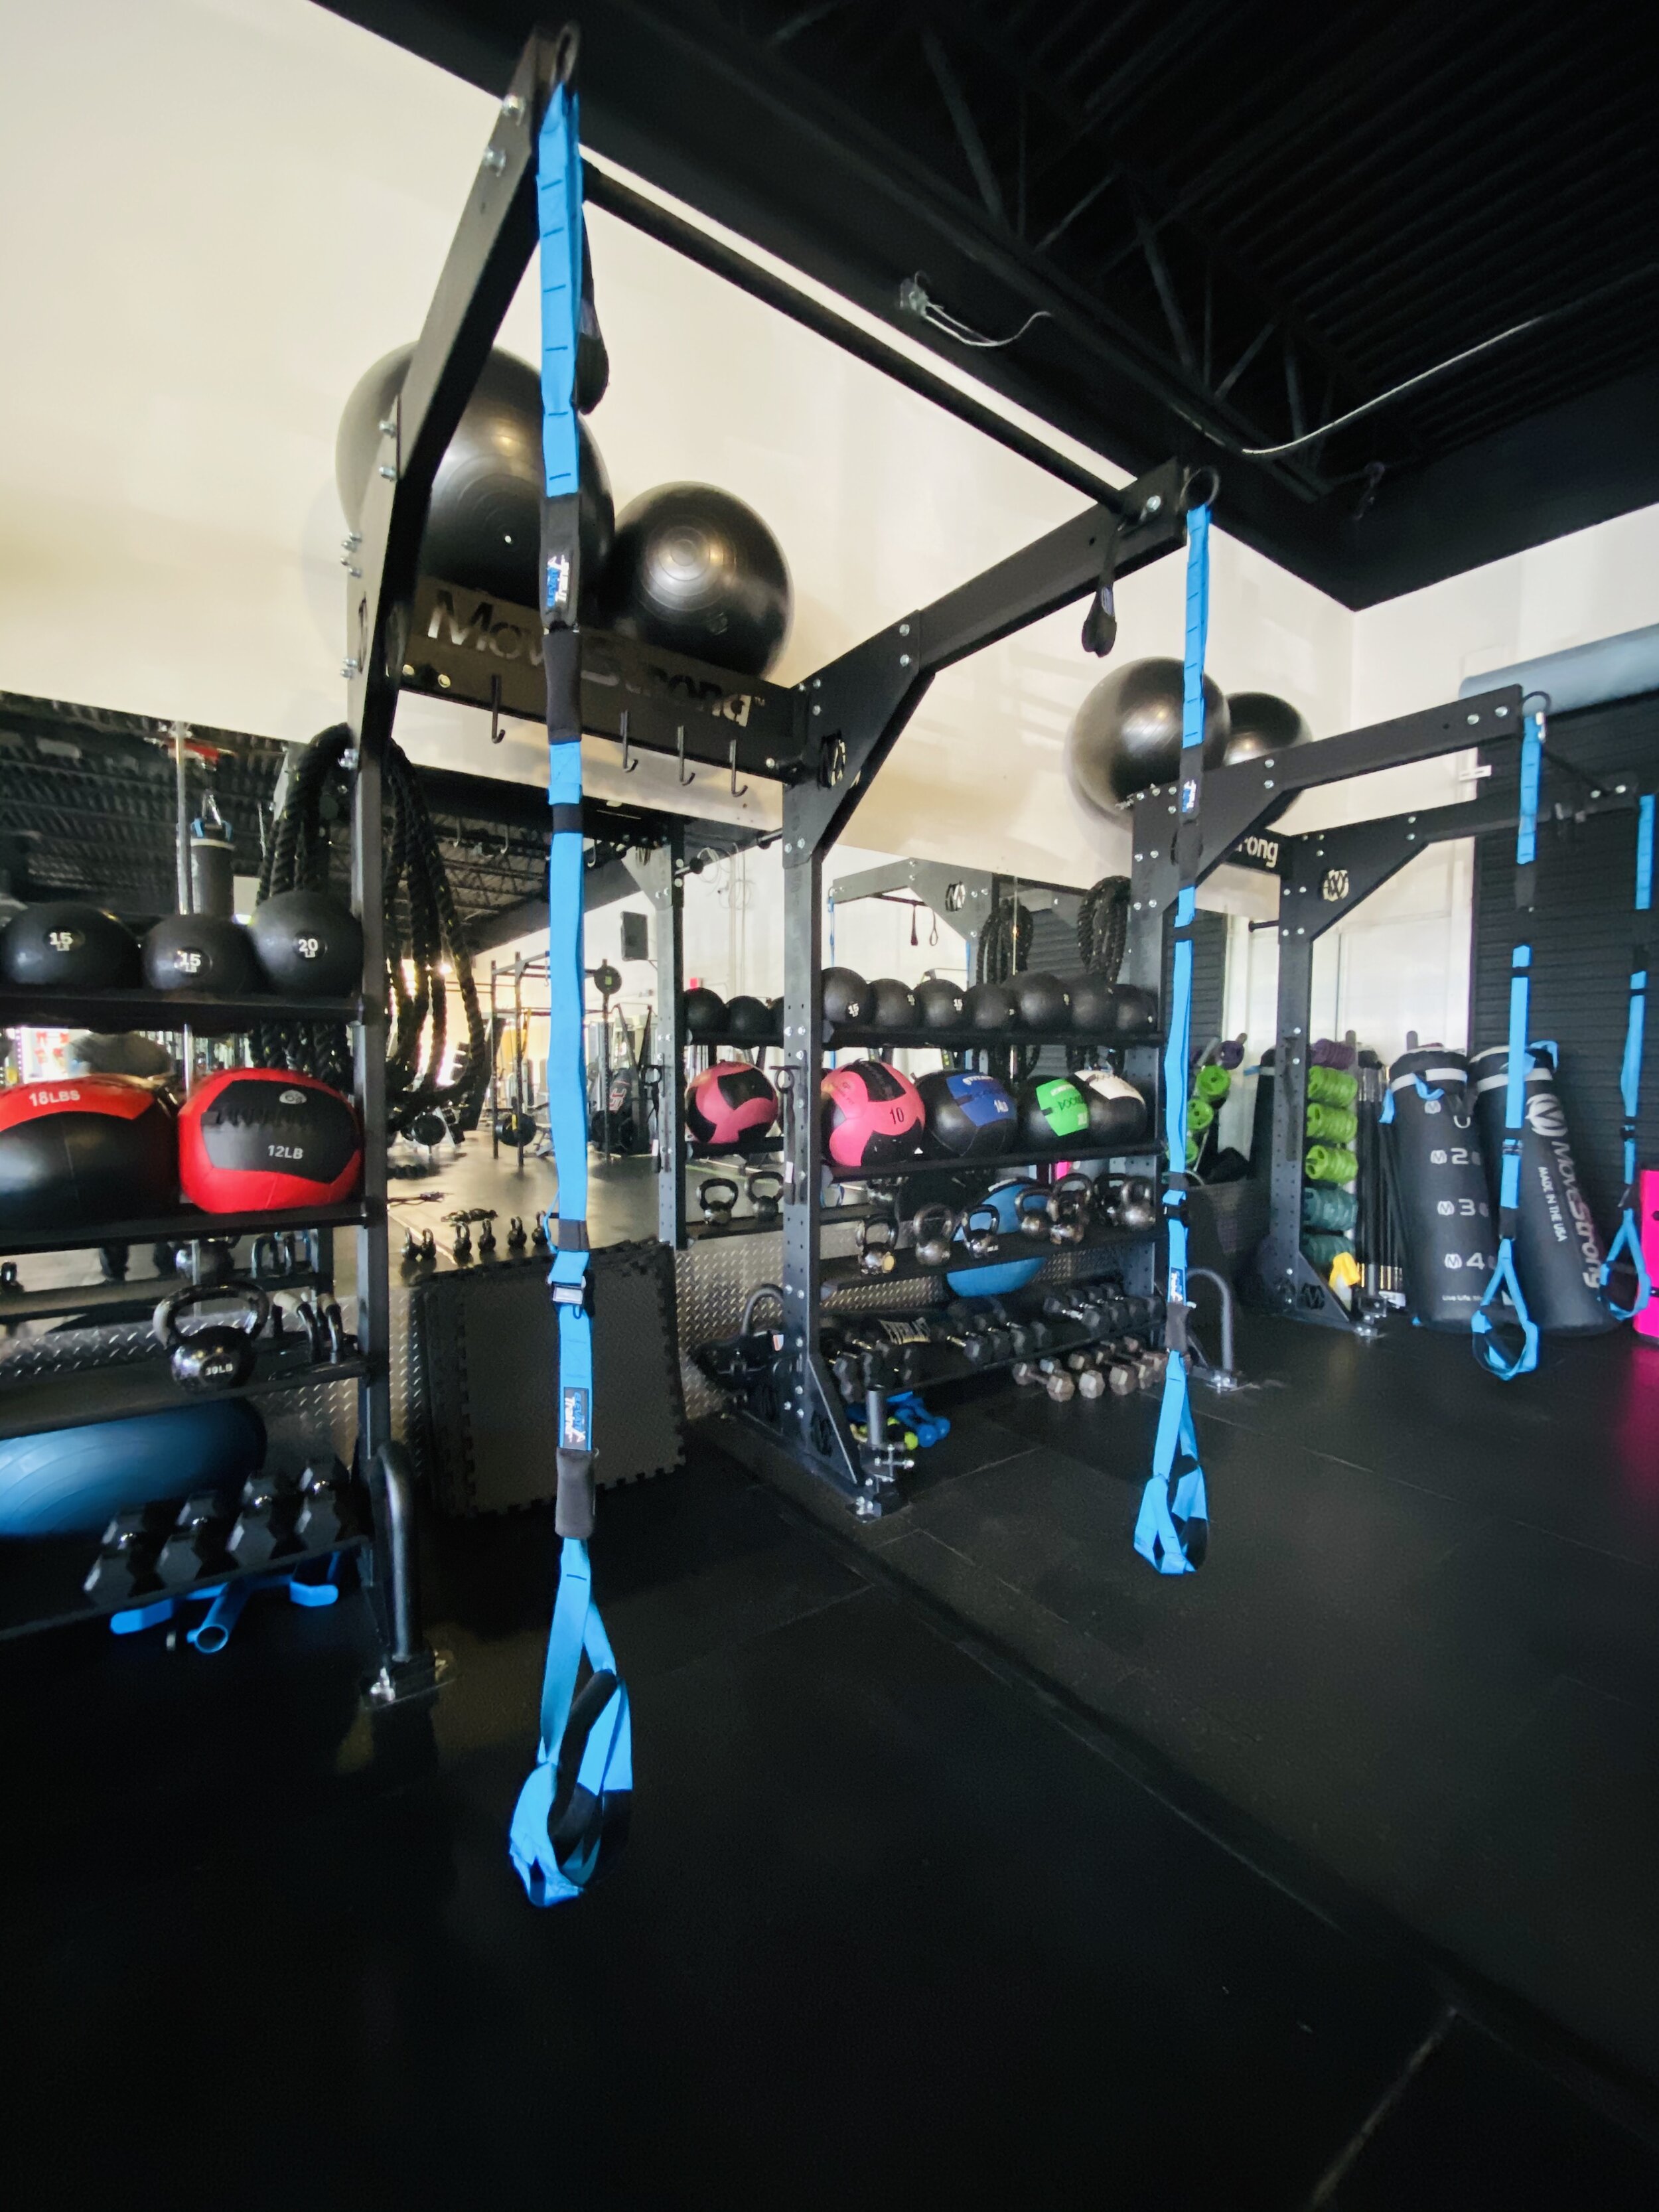 Custom Design For HIIT Group Training Fitness Gym - MoveStrong